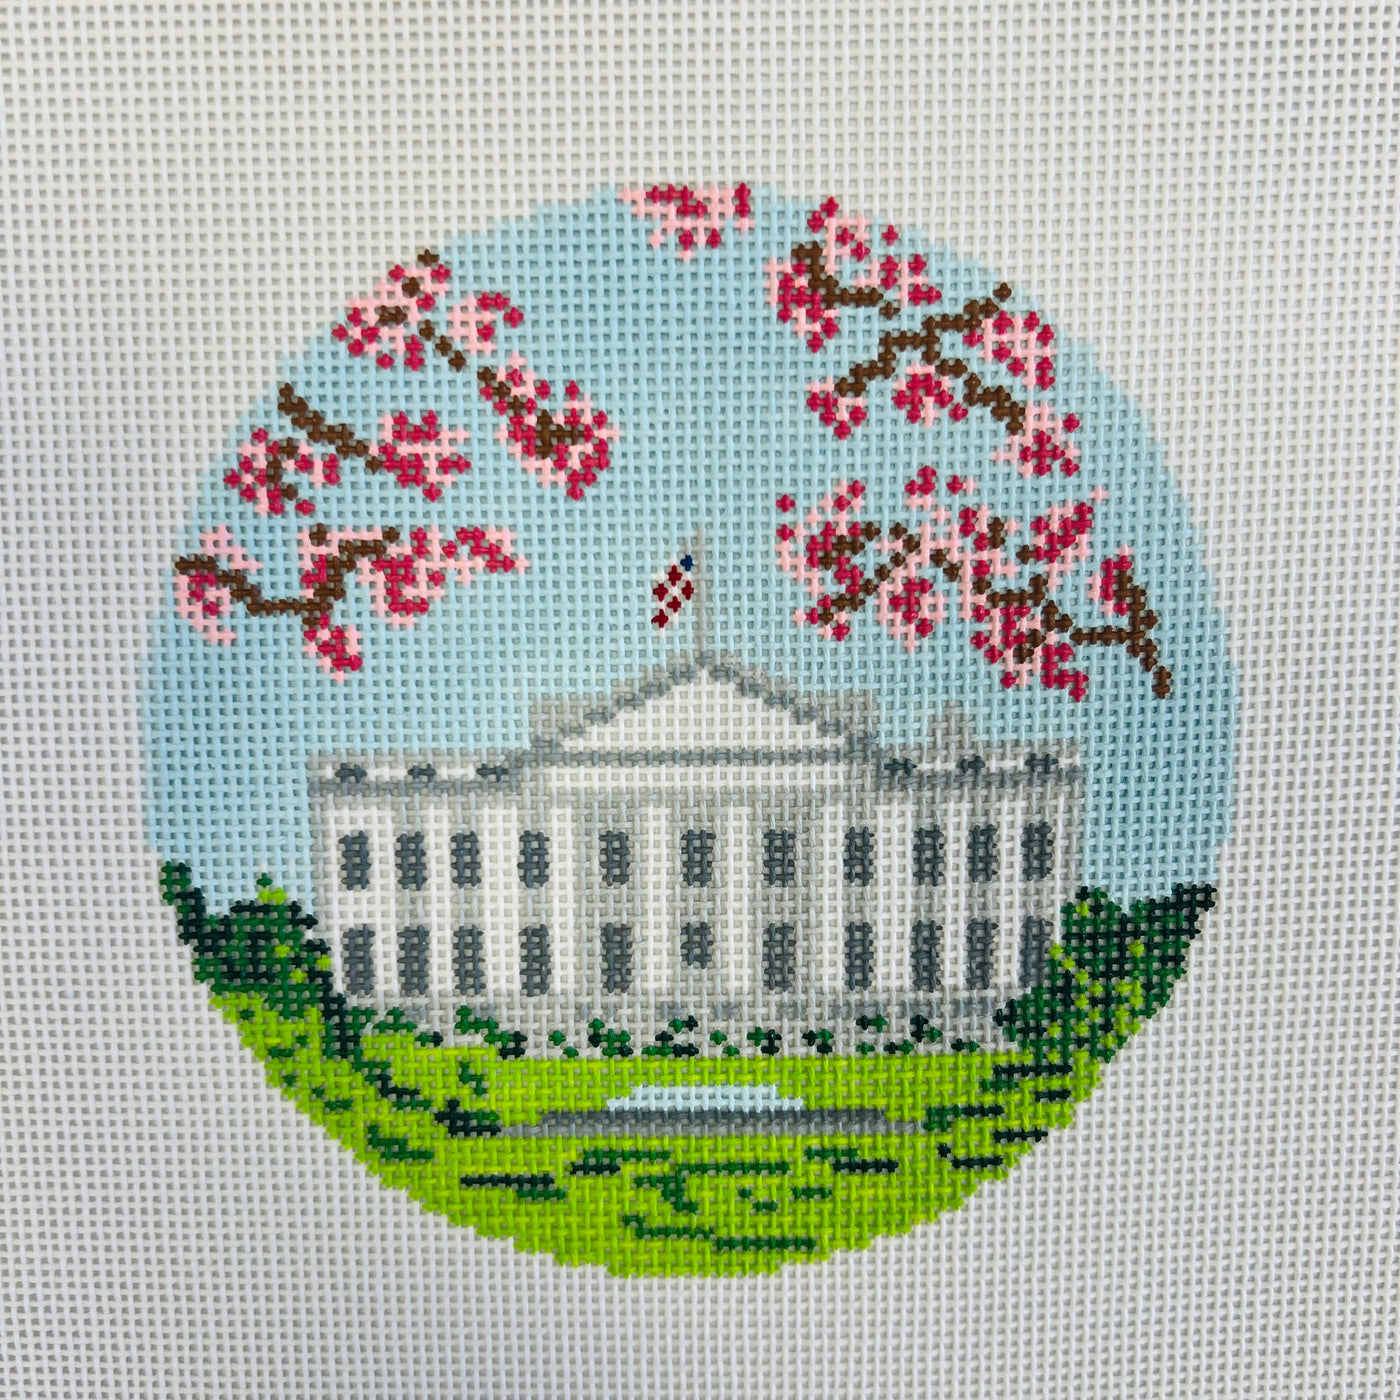 White House with Cherry Blossoms Ornament